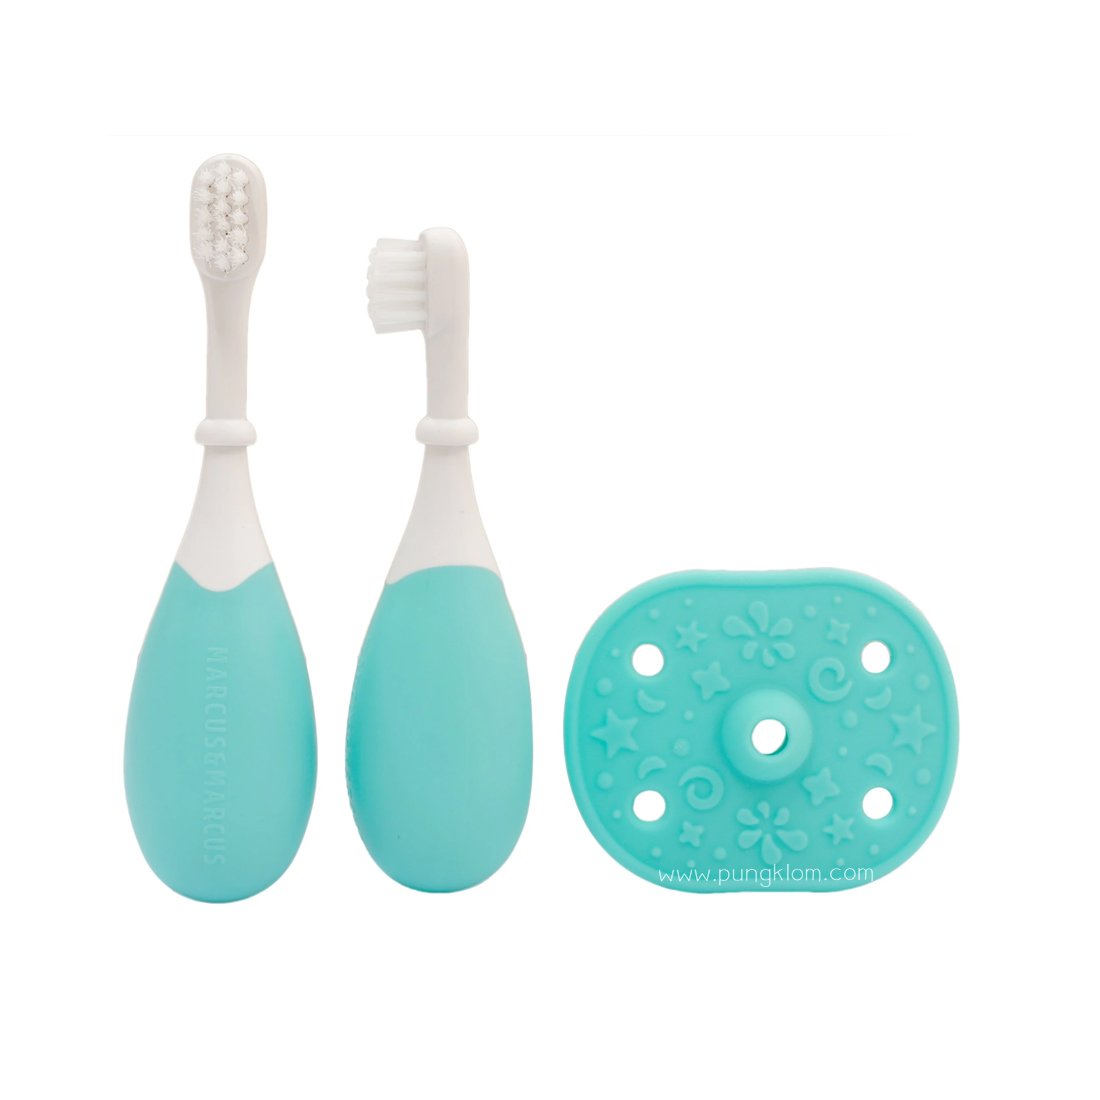 Marcus & Marcus - 3 Stage Palm Grasp Toothbrush Set